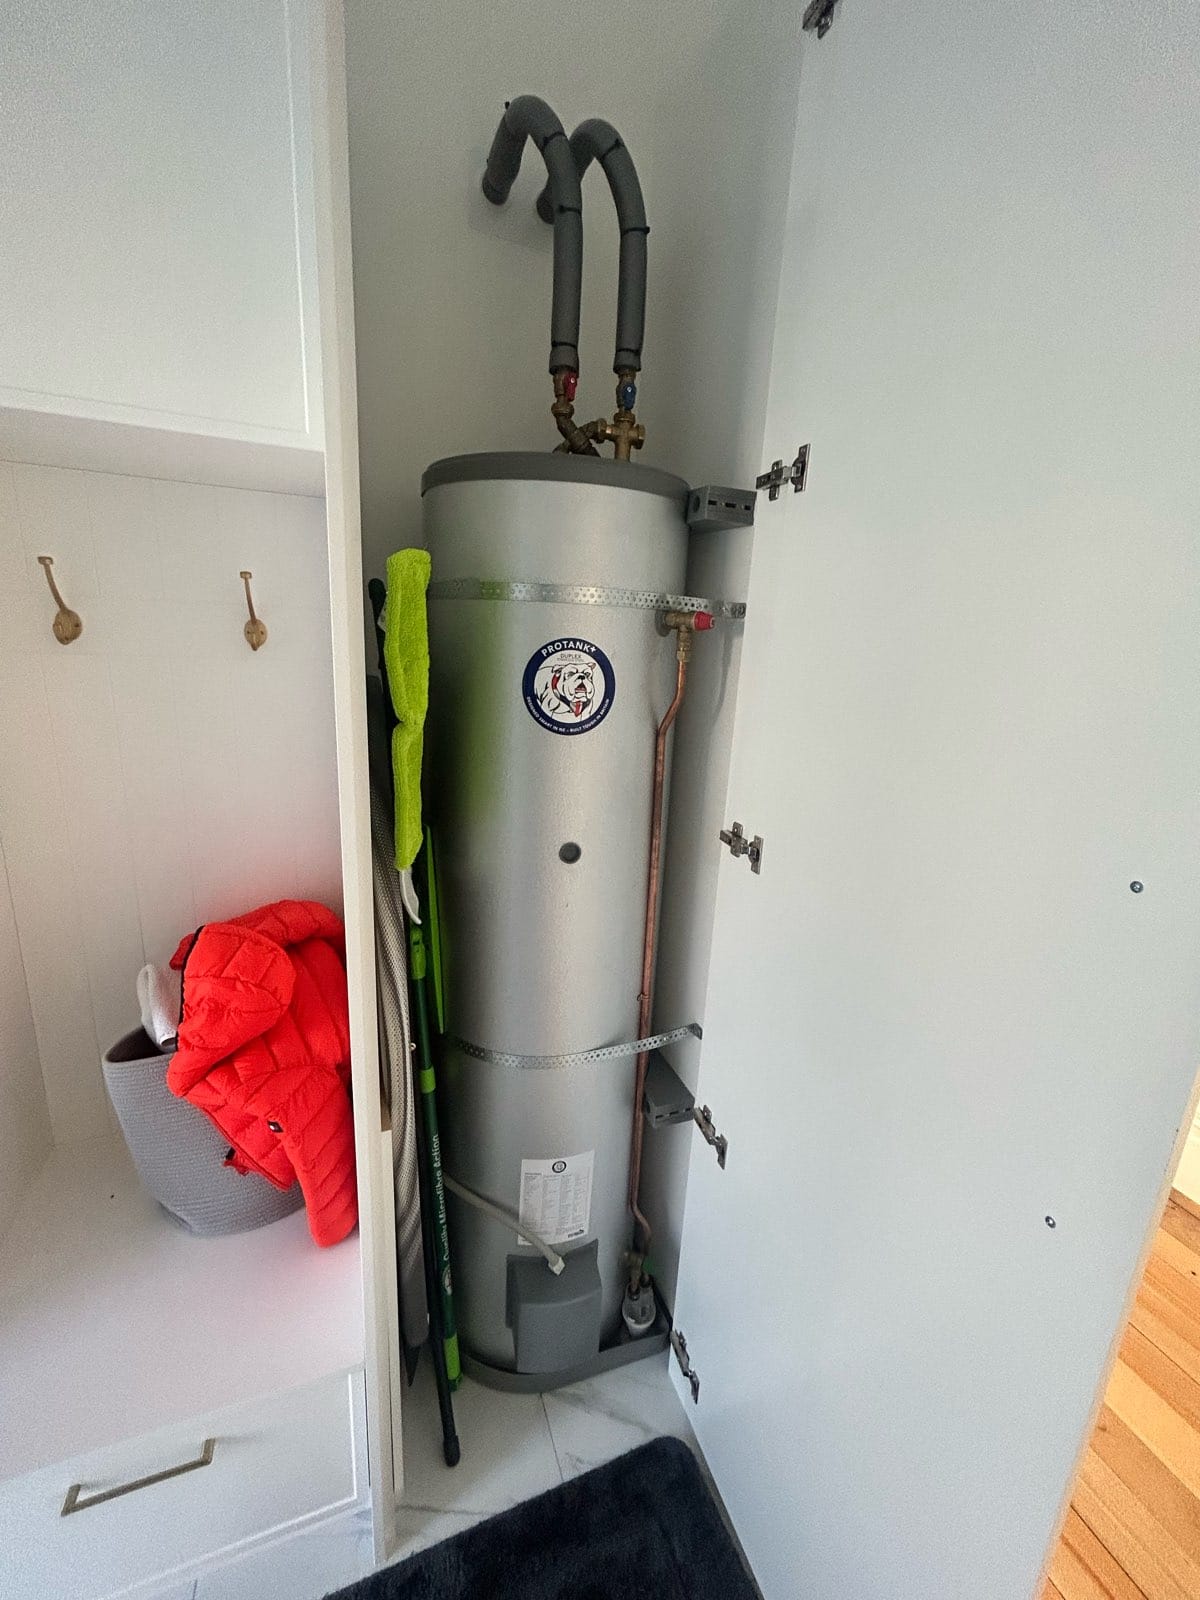 What Is An Electric Hot Water Cylinder?